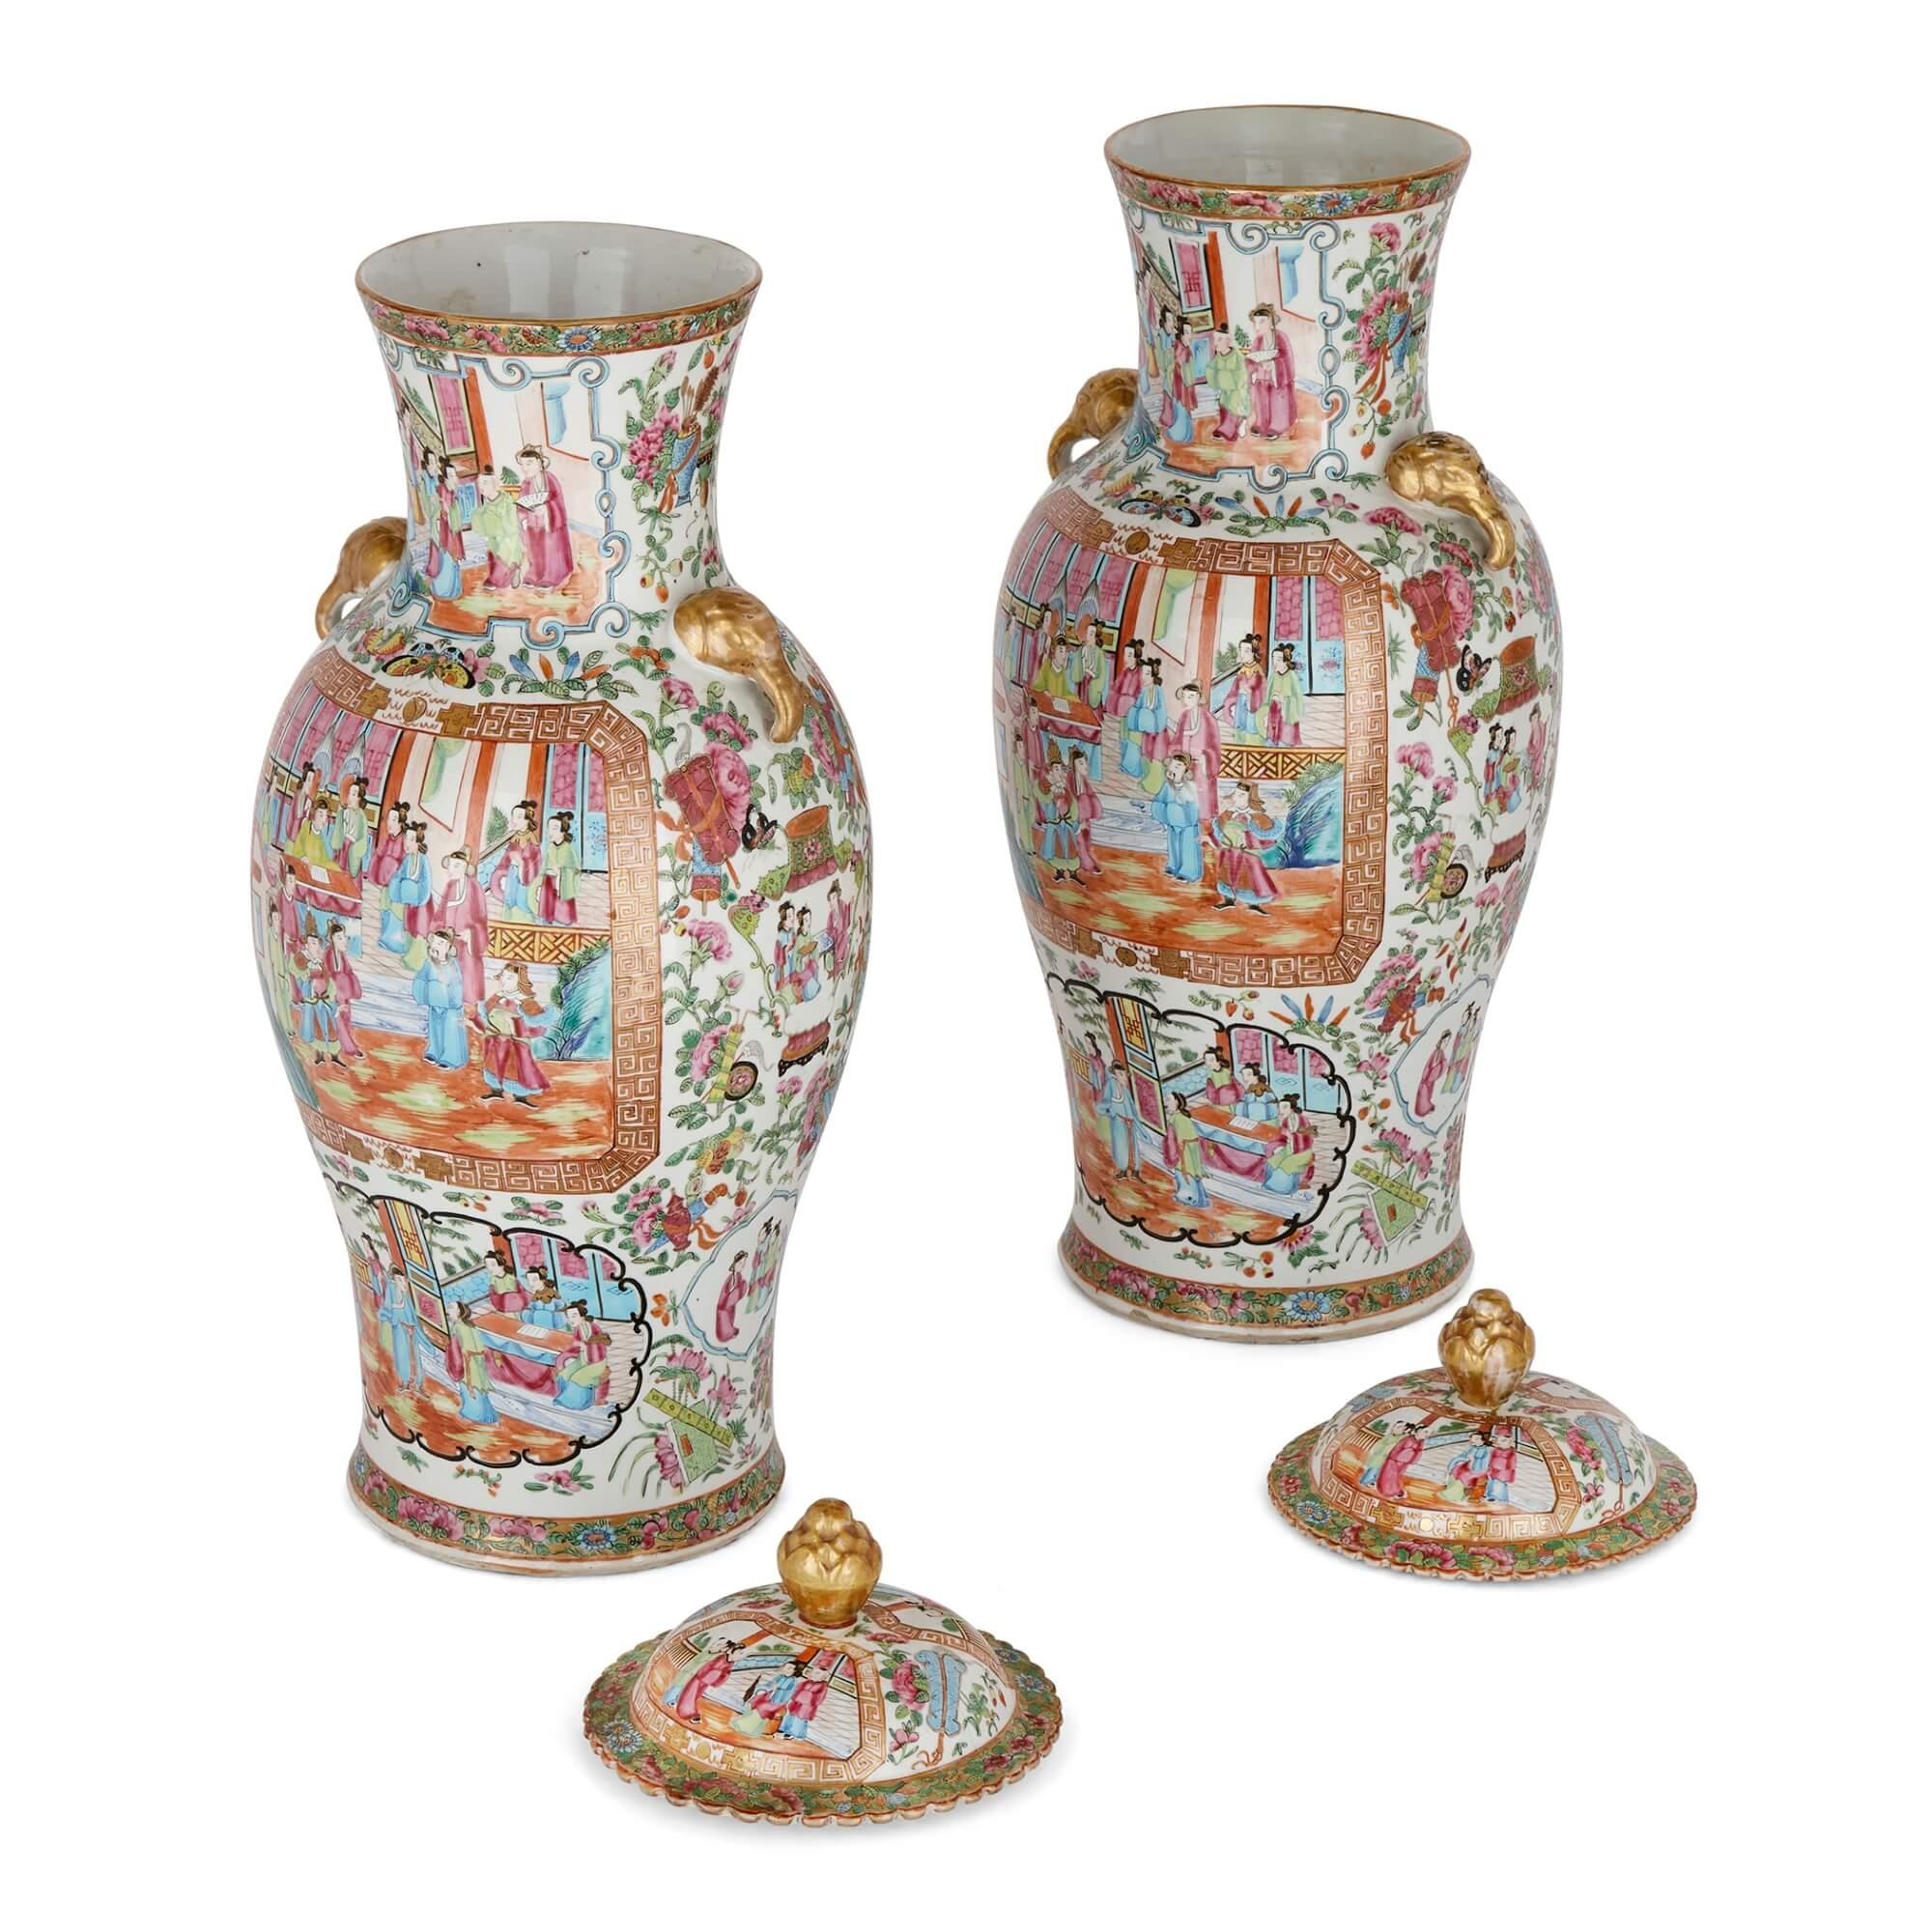 Pair of large Canton style famille rose porcelain vases.
Chinese, Late 19th century.
Measures: Height 64cm, diameter 25cm.

Crafted in Qing dynasty China in the late nineteenth century for the export market, these fine porcelain vases, complete